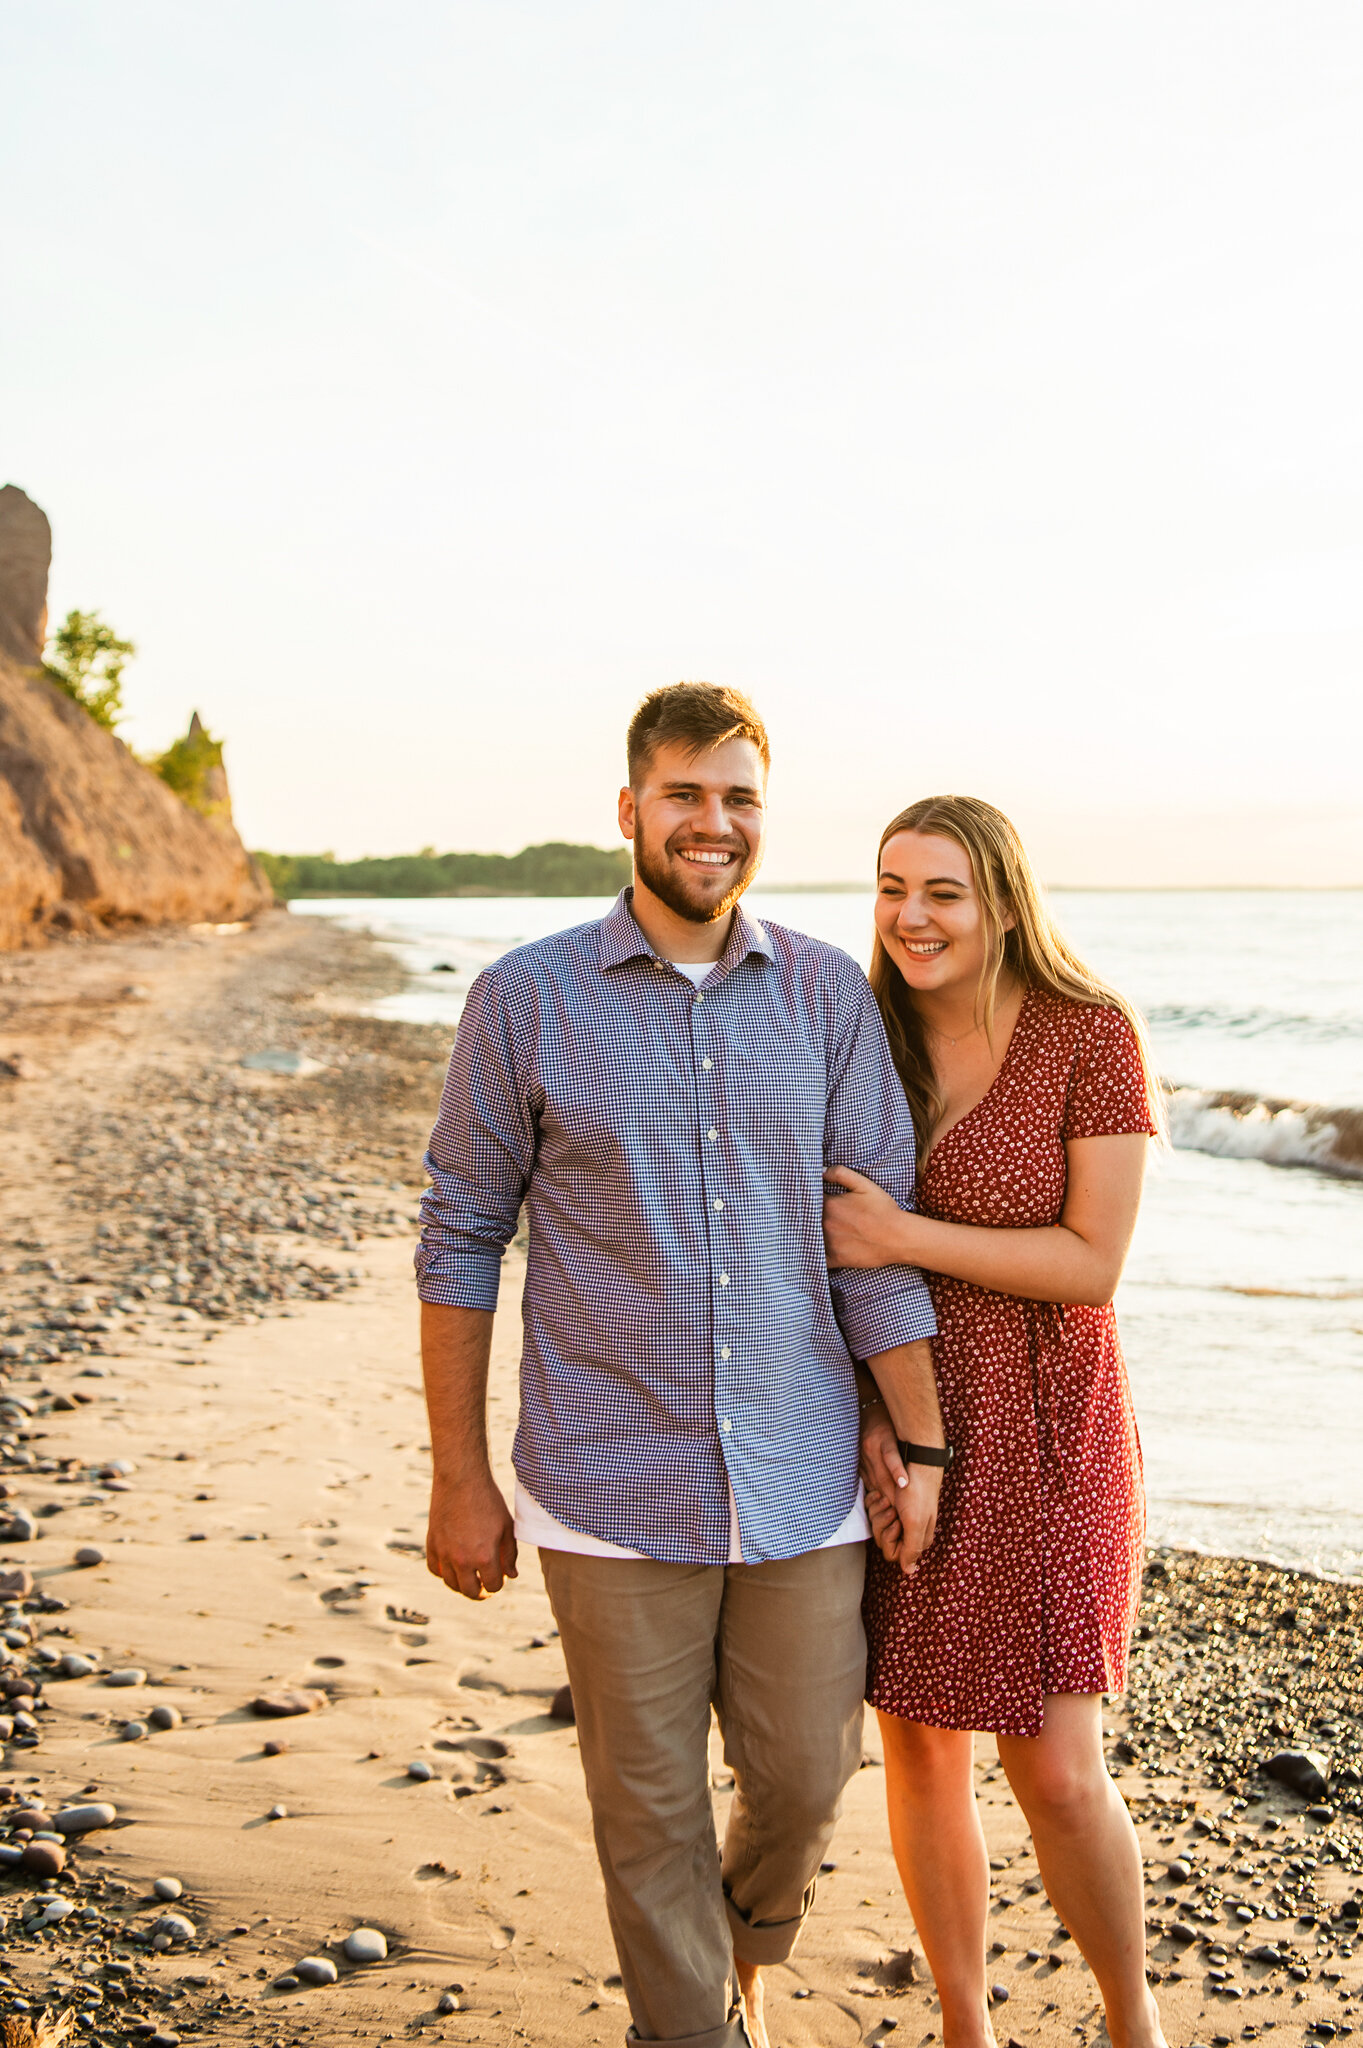 Chimney_Bluffs_State_Park_Rochester_Engagement_Session_JILL_STUDIO_Rochester_NY_Photographer_6989.jpg